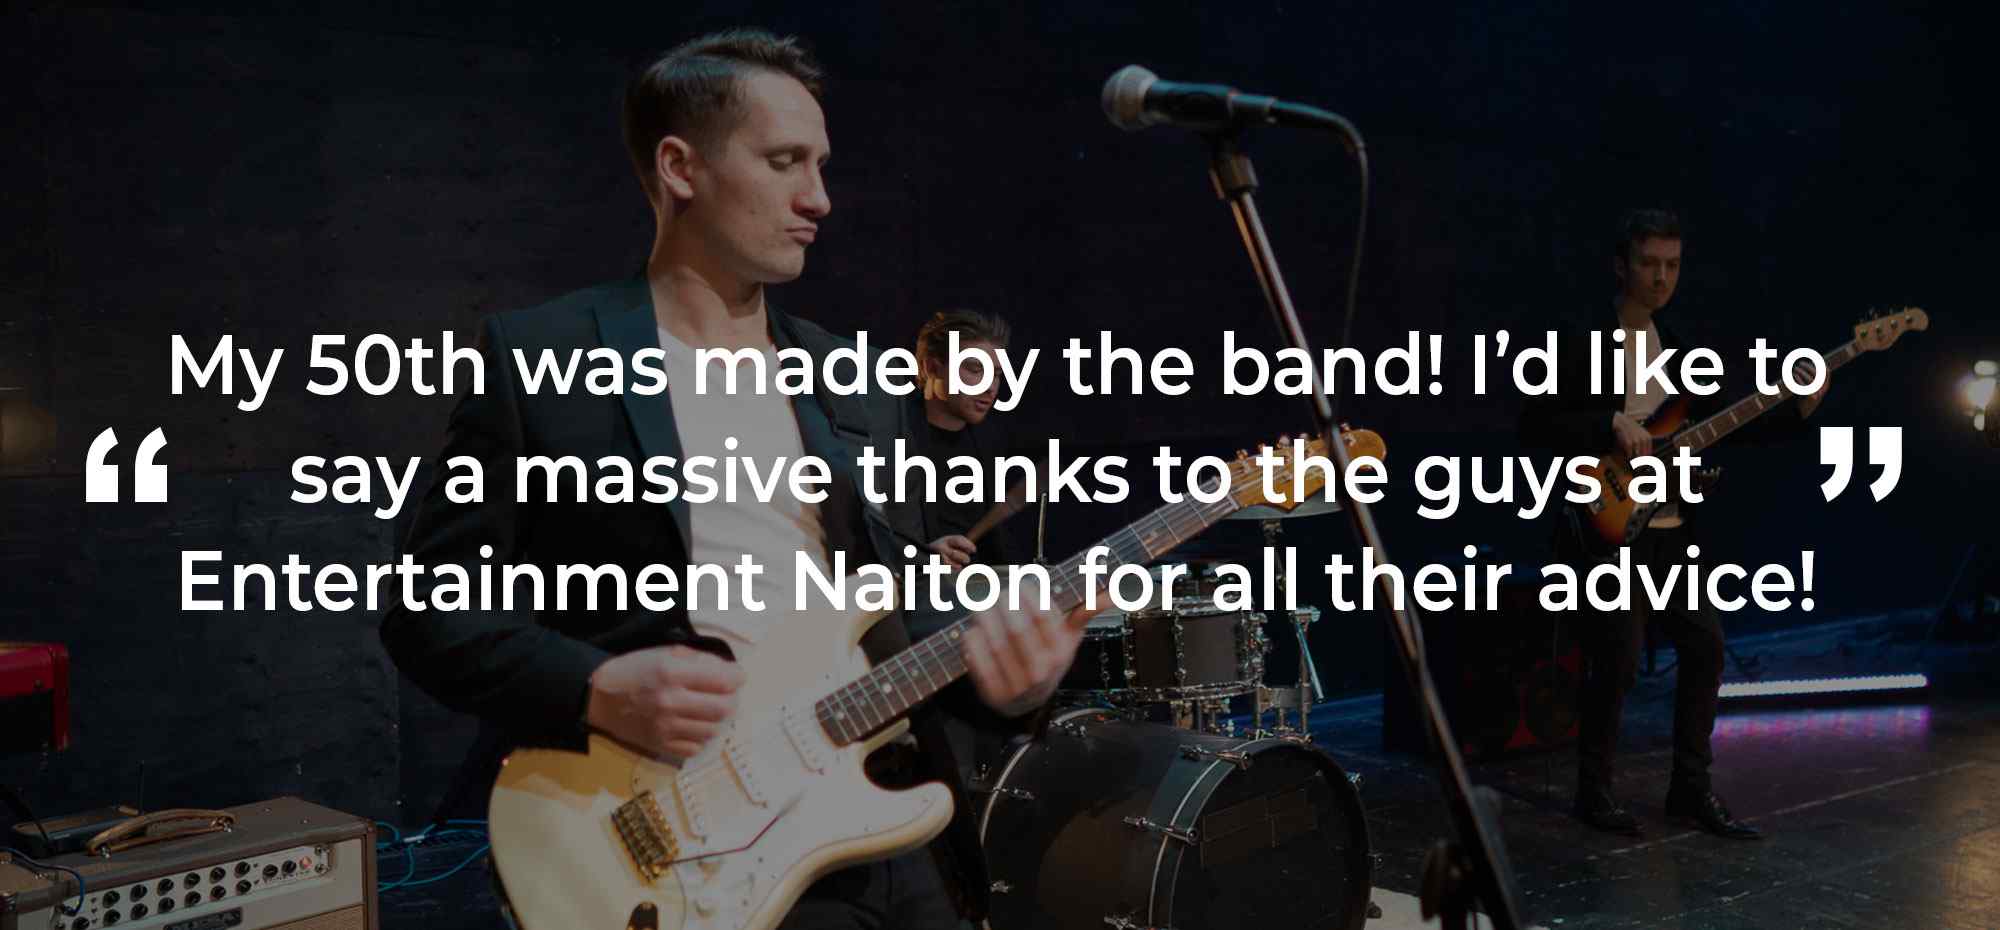 Client Review of a Party Band Suffolk